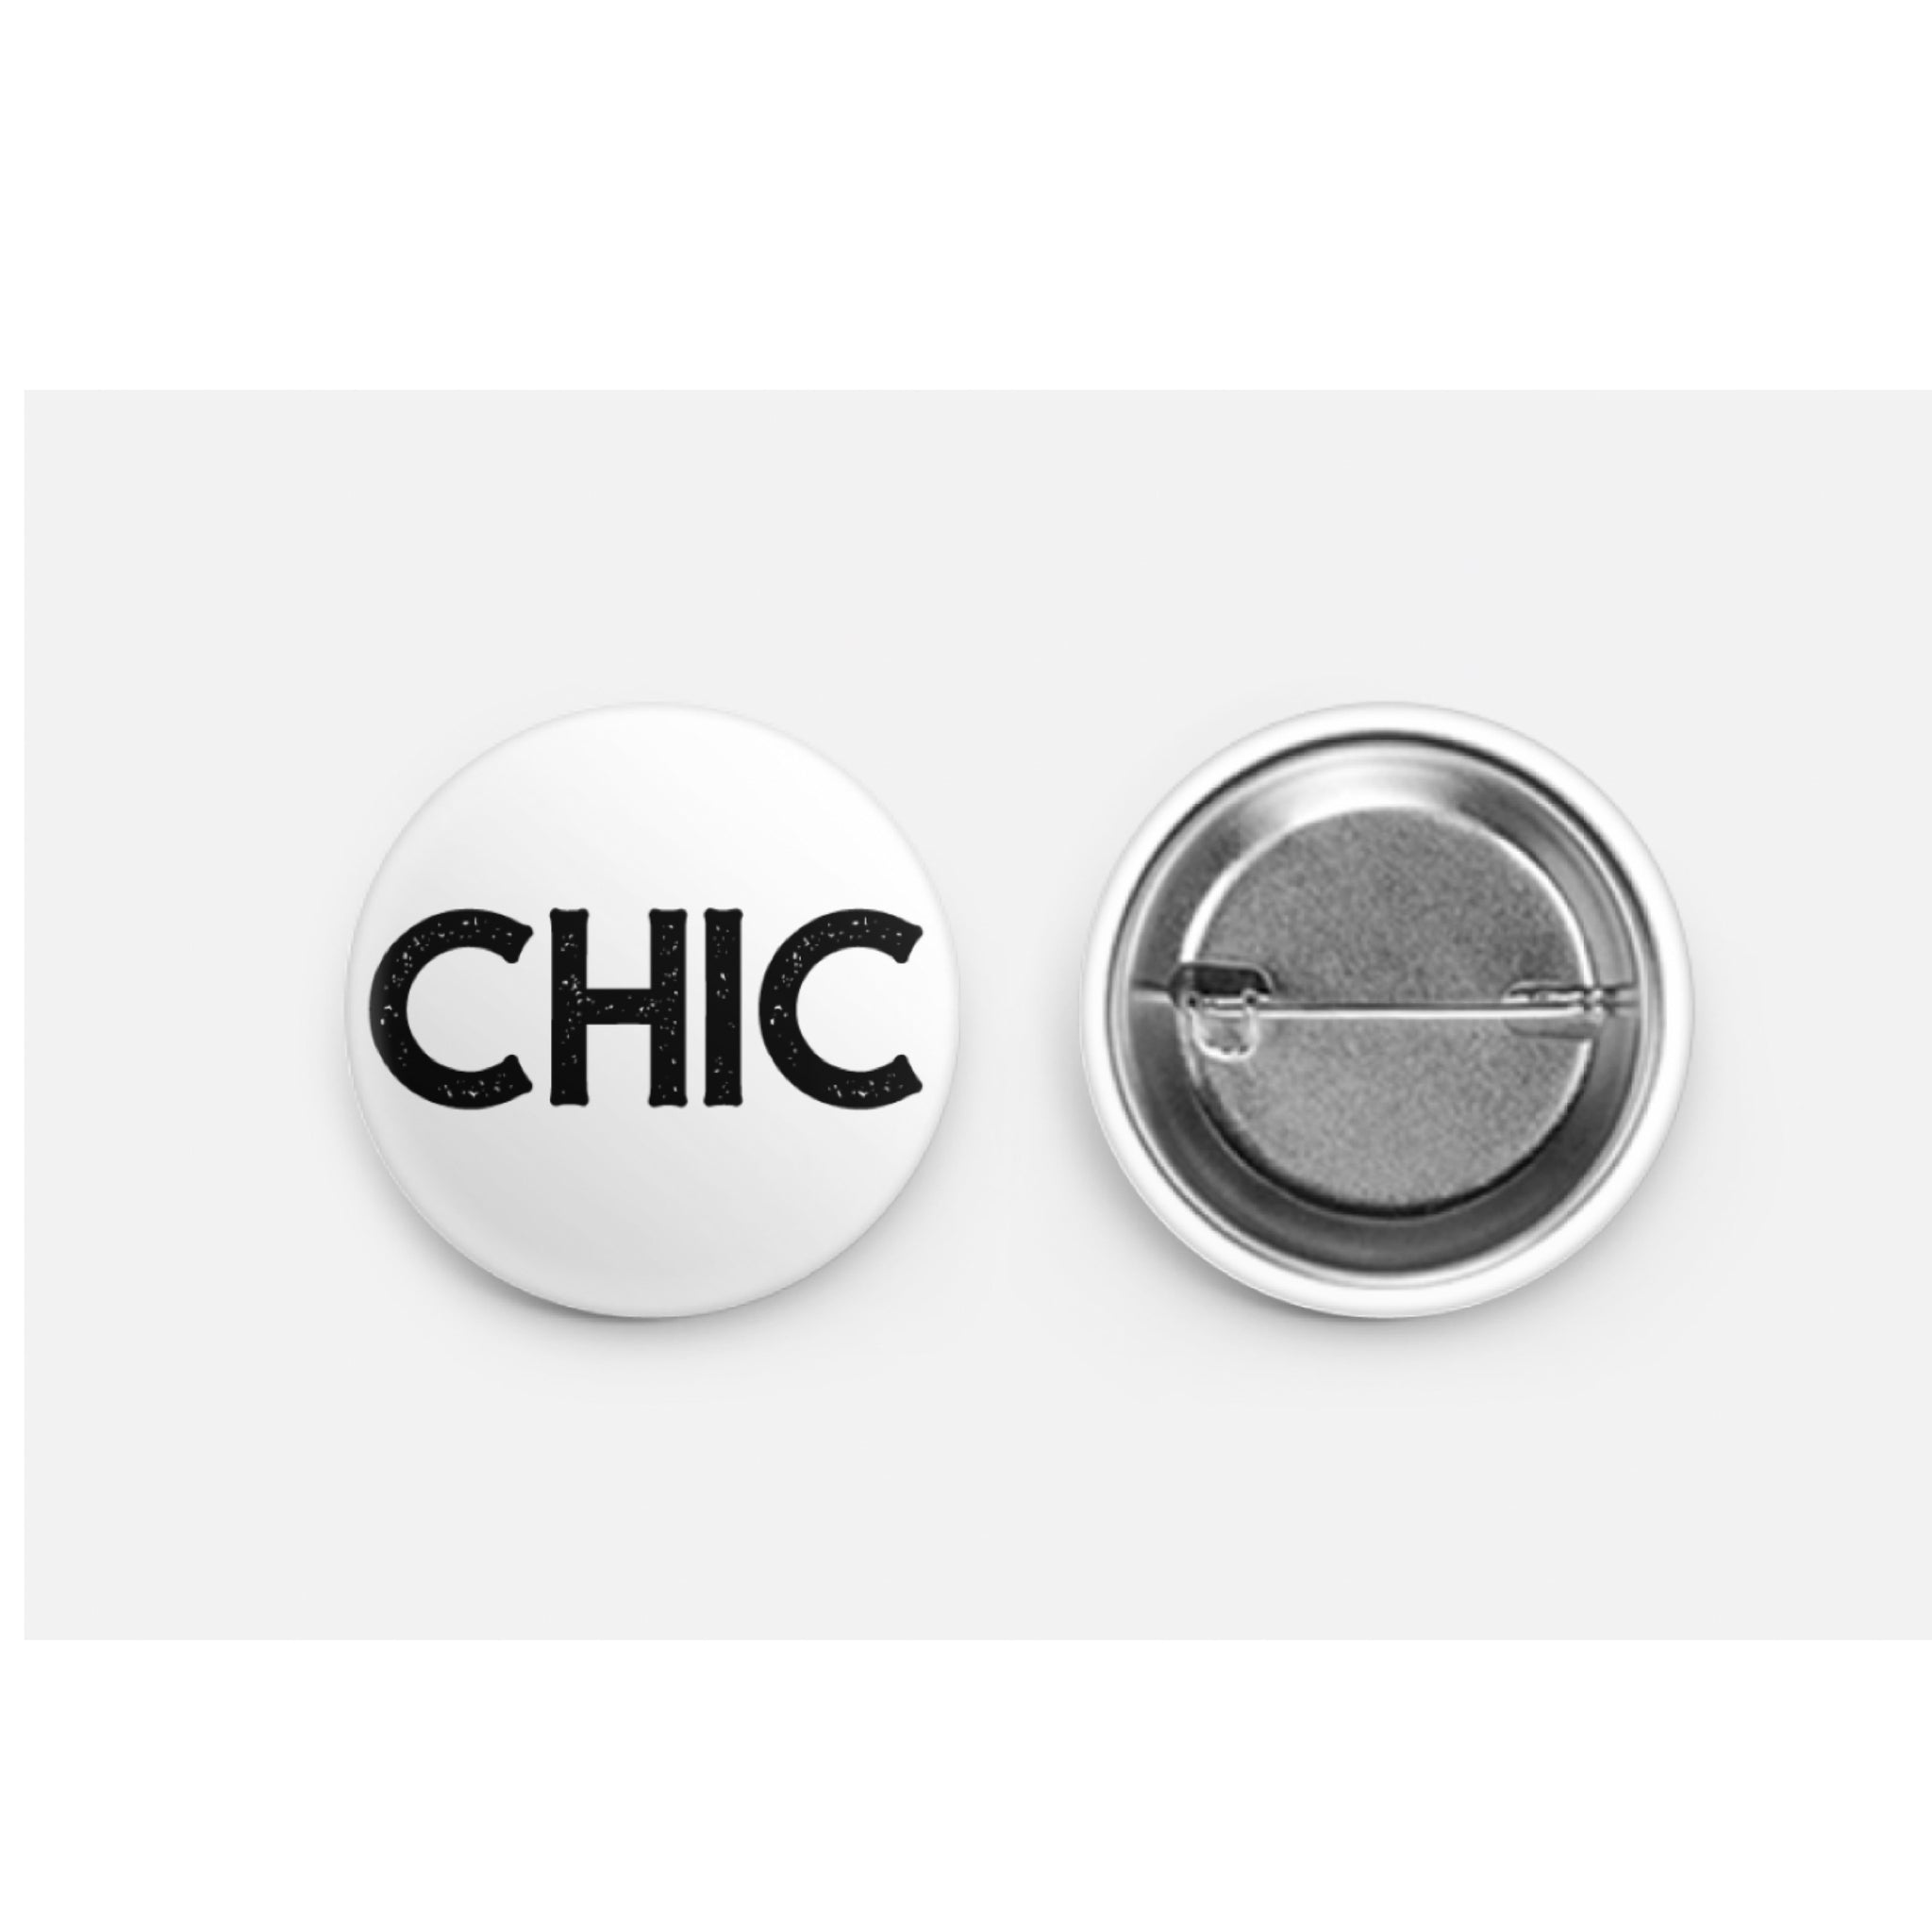 Chic Button (distressed logo)